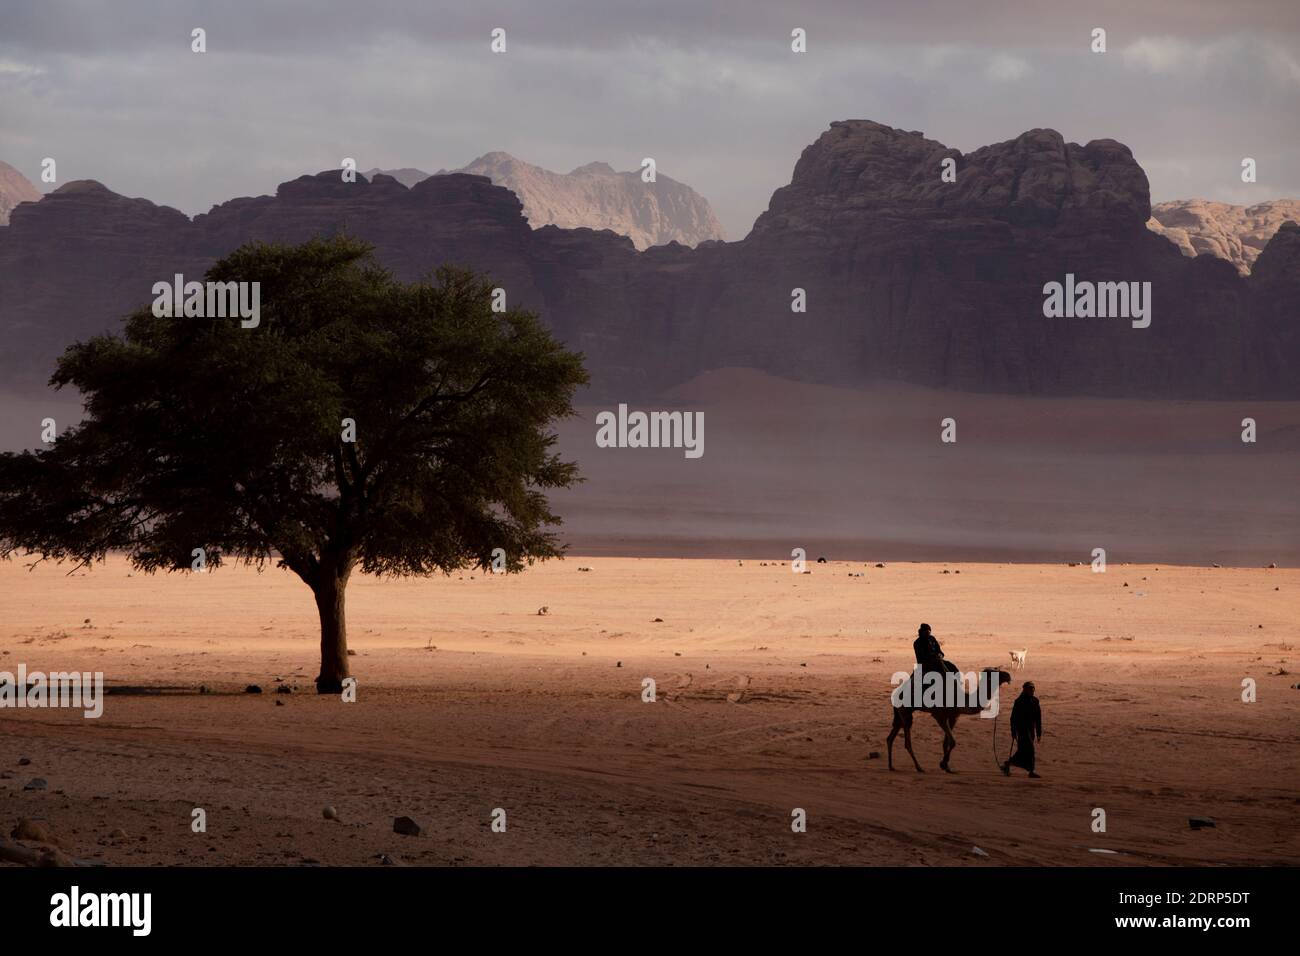 Camel in Wadi Rum desert, just a few weeks before the global lockdown due to the pandemic Stock Photo